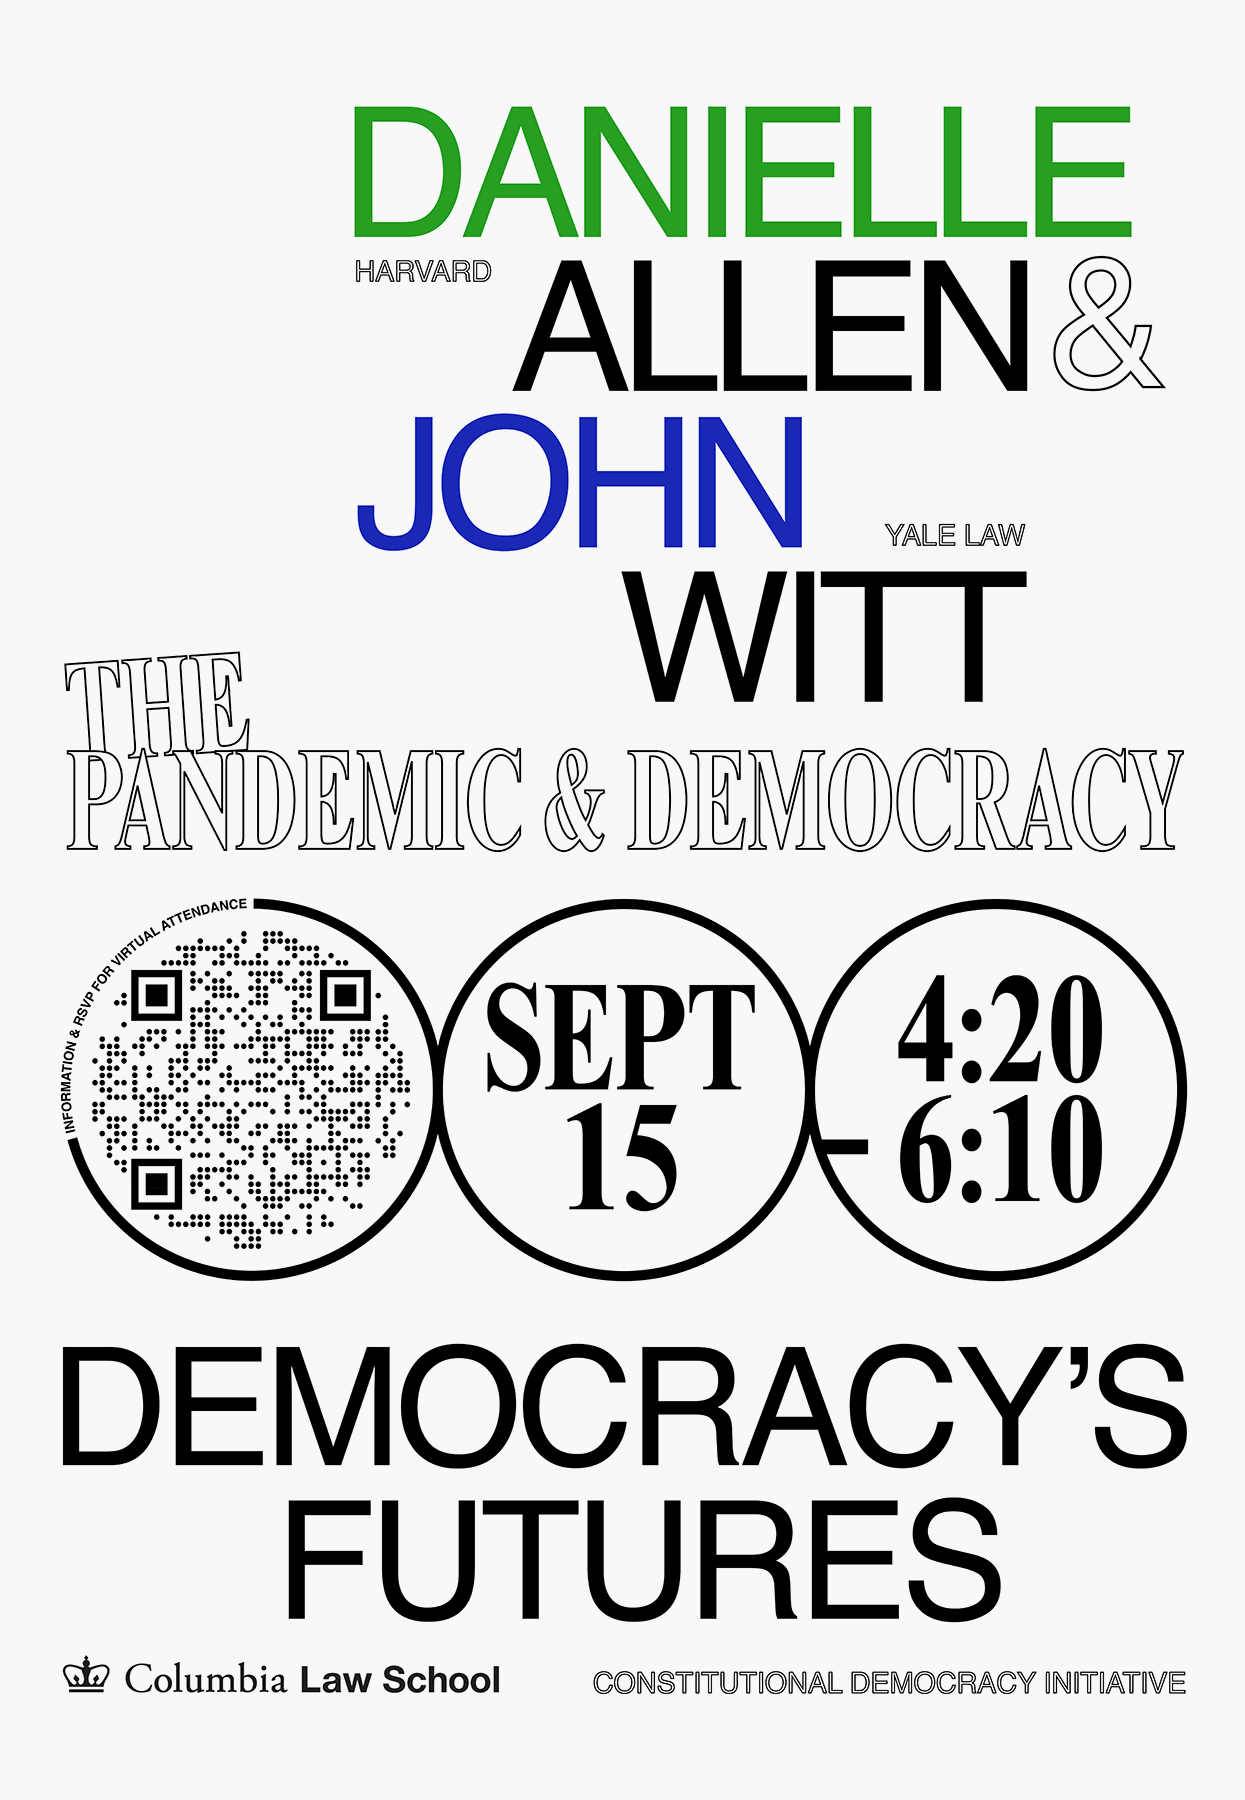 Democracy's Futures, "The Pandemic and Democracy"